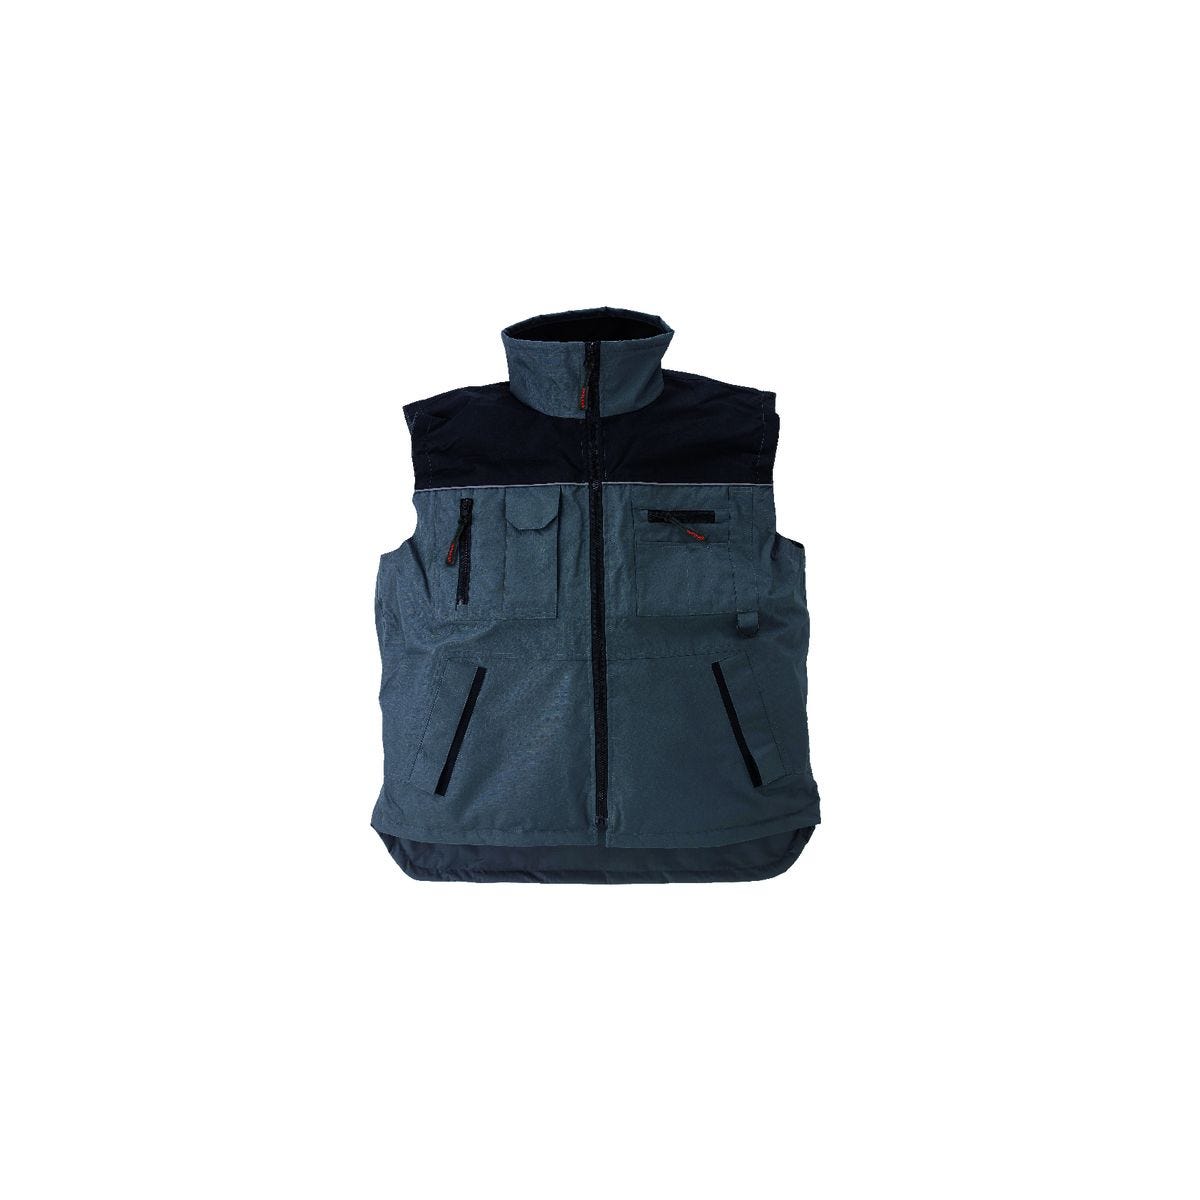 RIPSTOP Gilet Froid gris/noir, Polyester Ripstop + Polaire 280g/m² - COVERGUARD - Taille XL 0